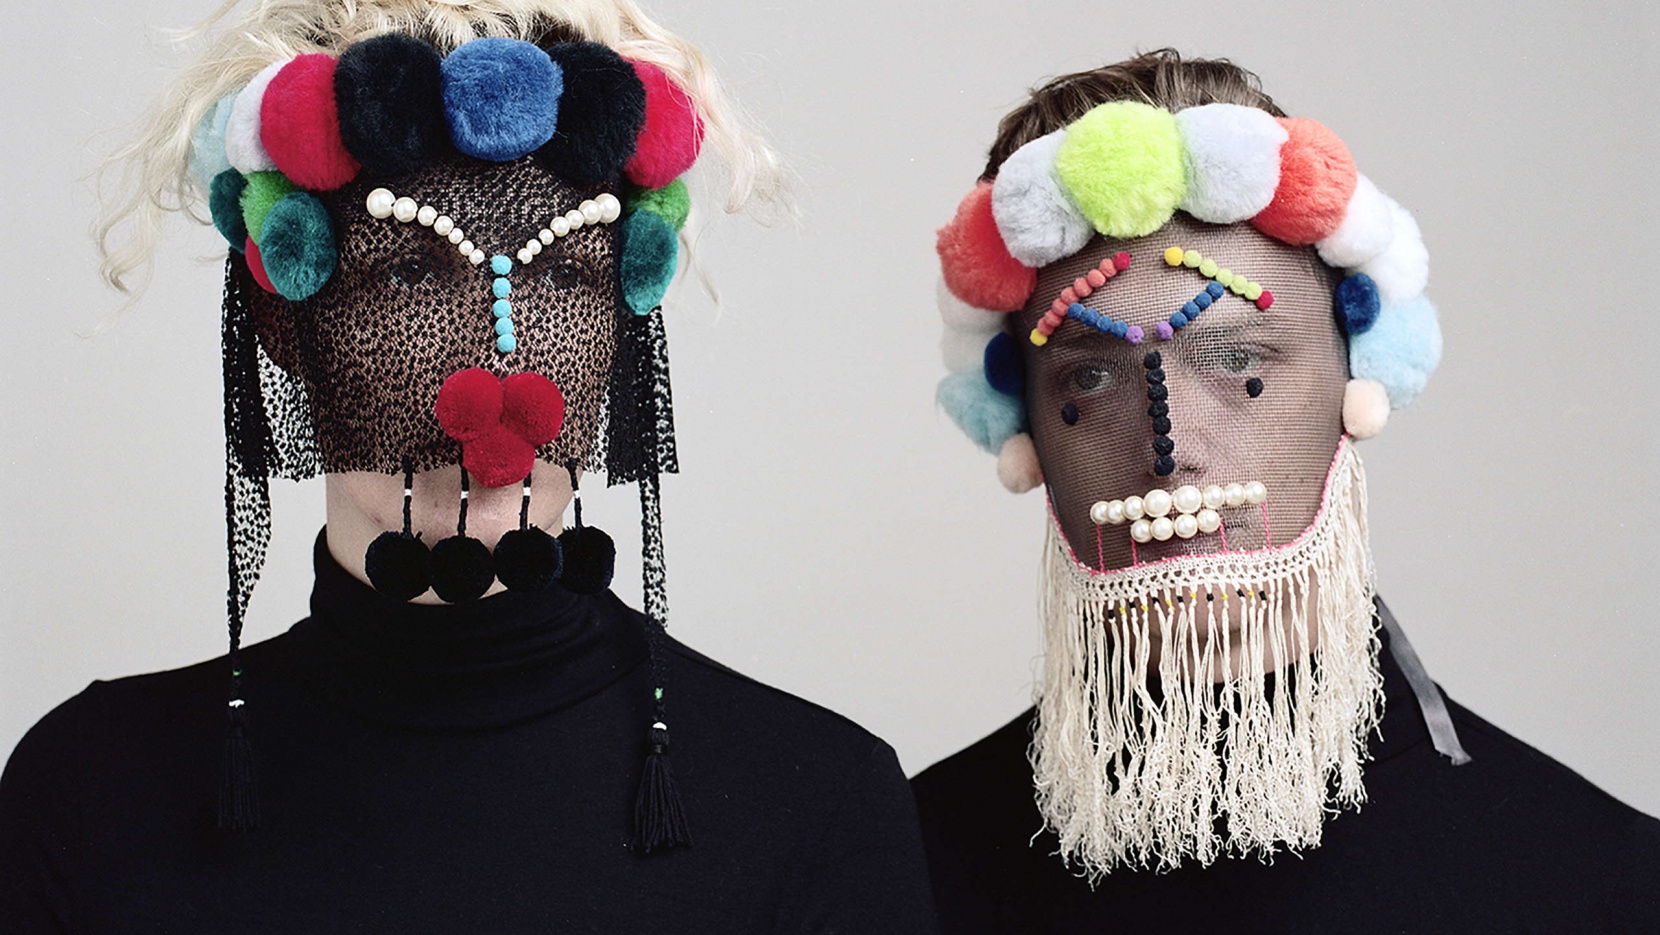 Vintage Clothing and Found Objects Compose Decorative Masks Designed by  Magnhild Kennedy — Colossal